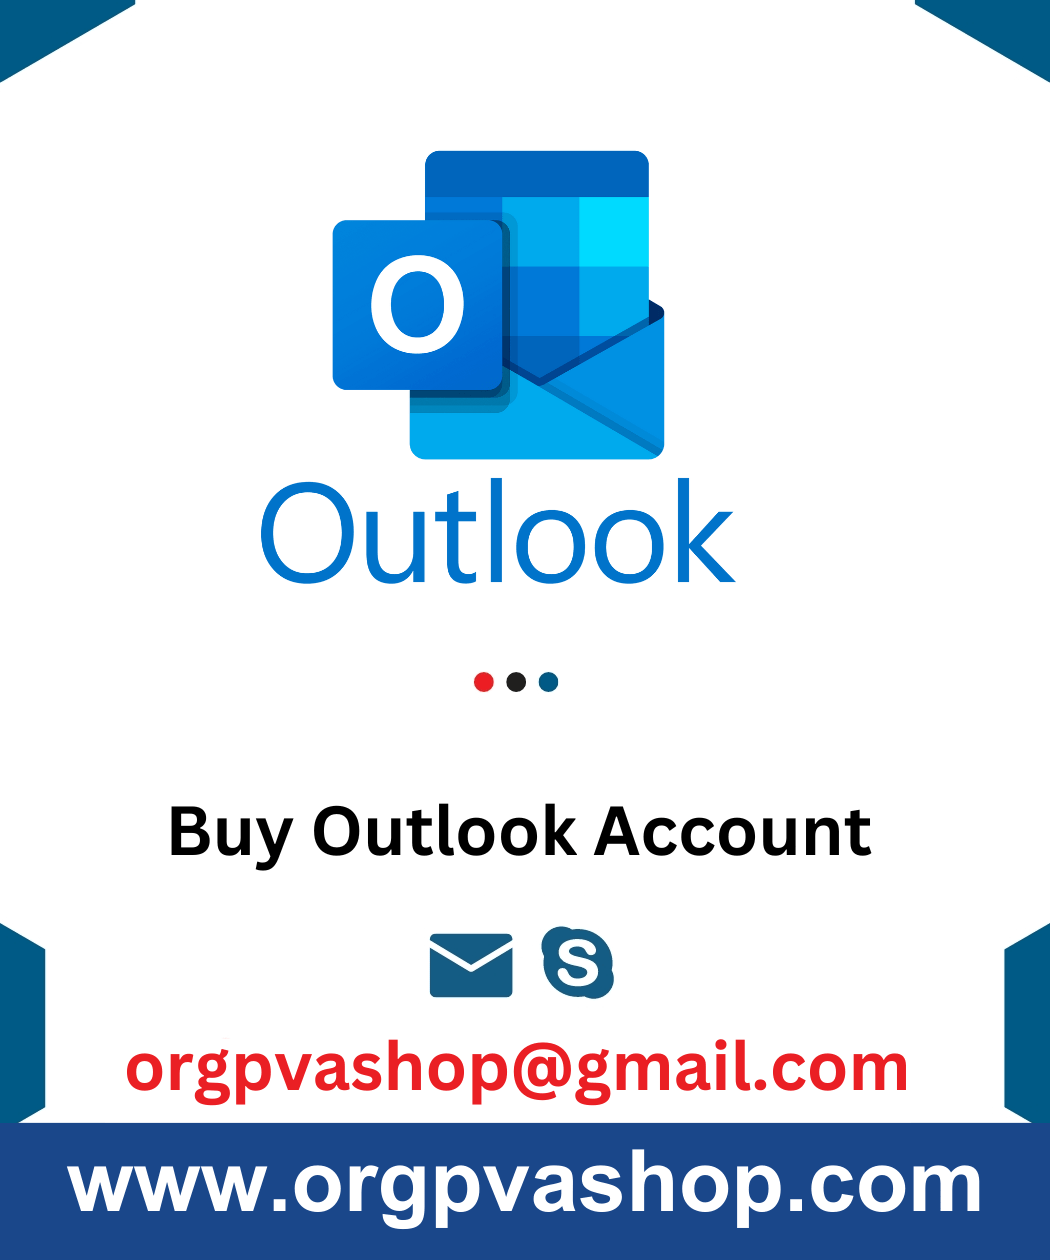 Aged Outlook accounts